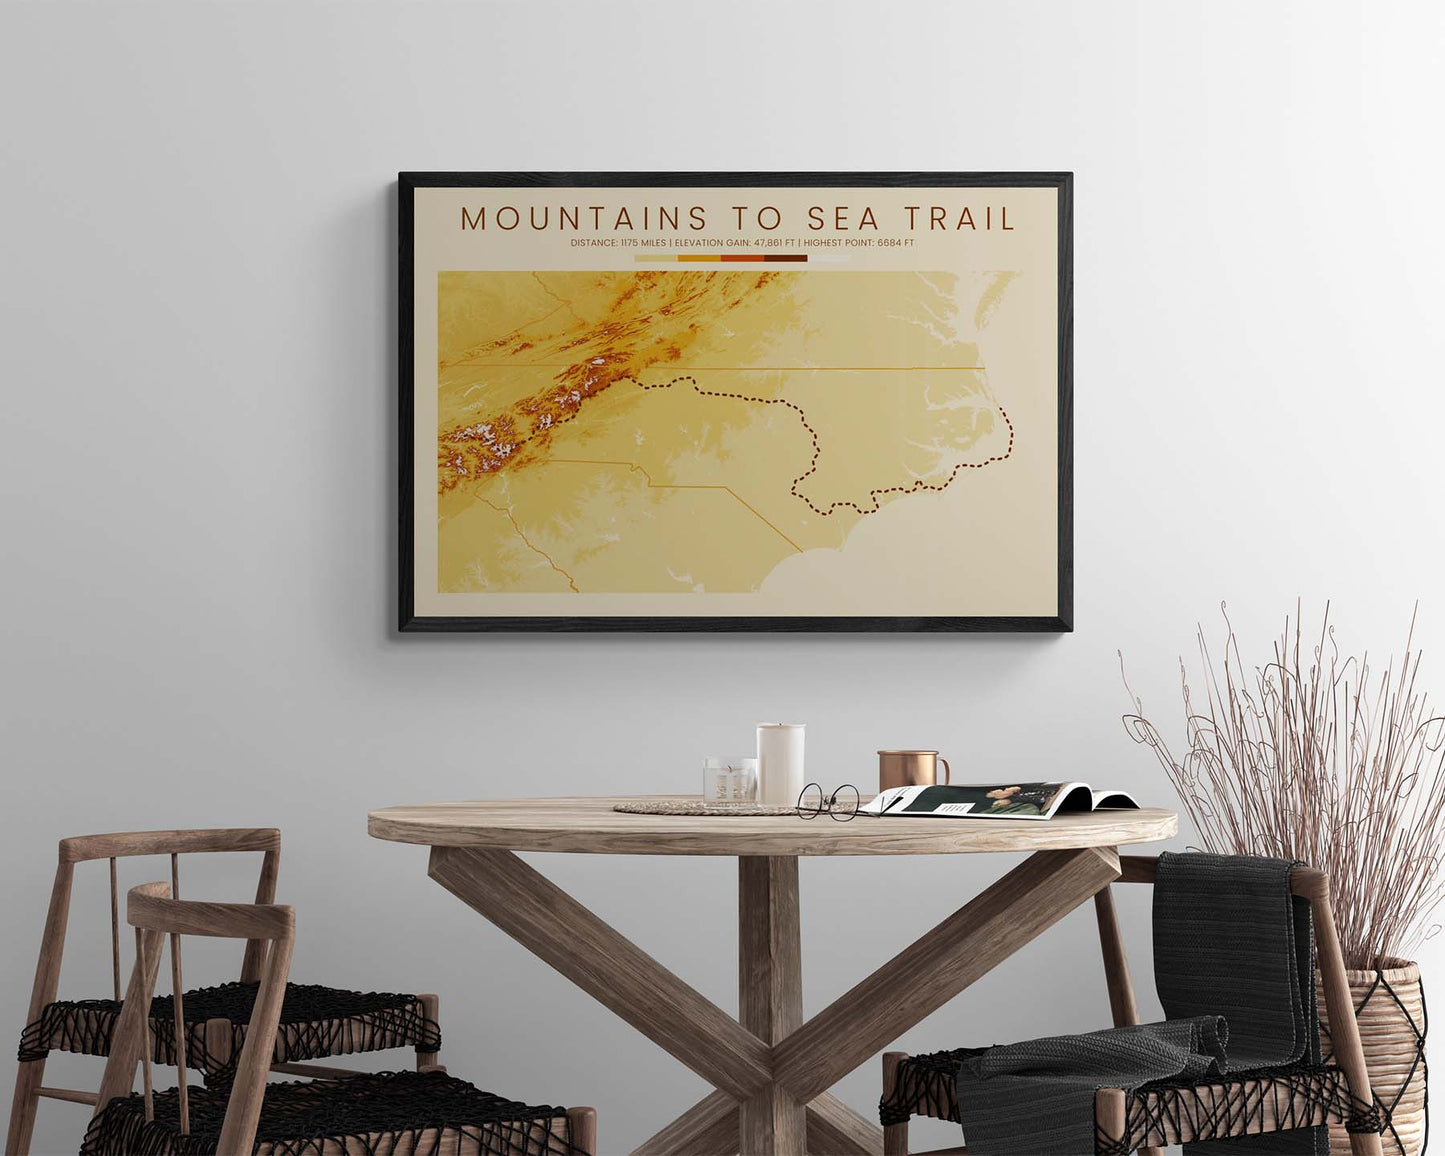 MST (North Carolina) Route Print with Contour Map in Modern Interior Decor